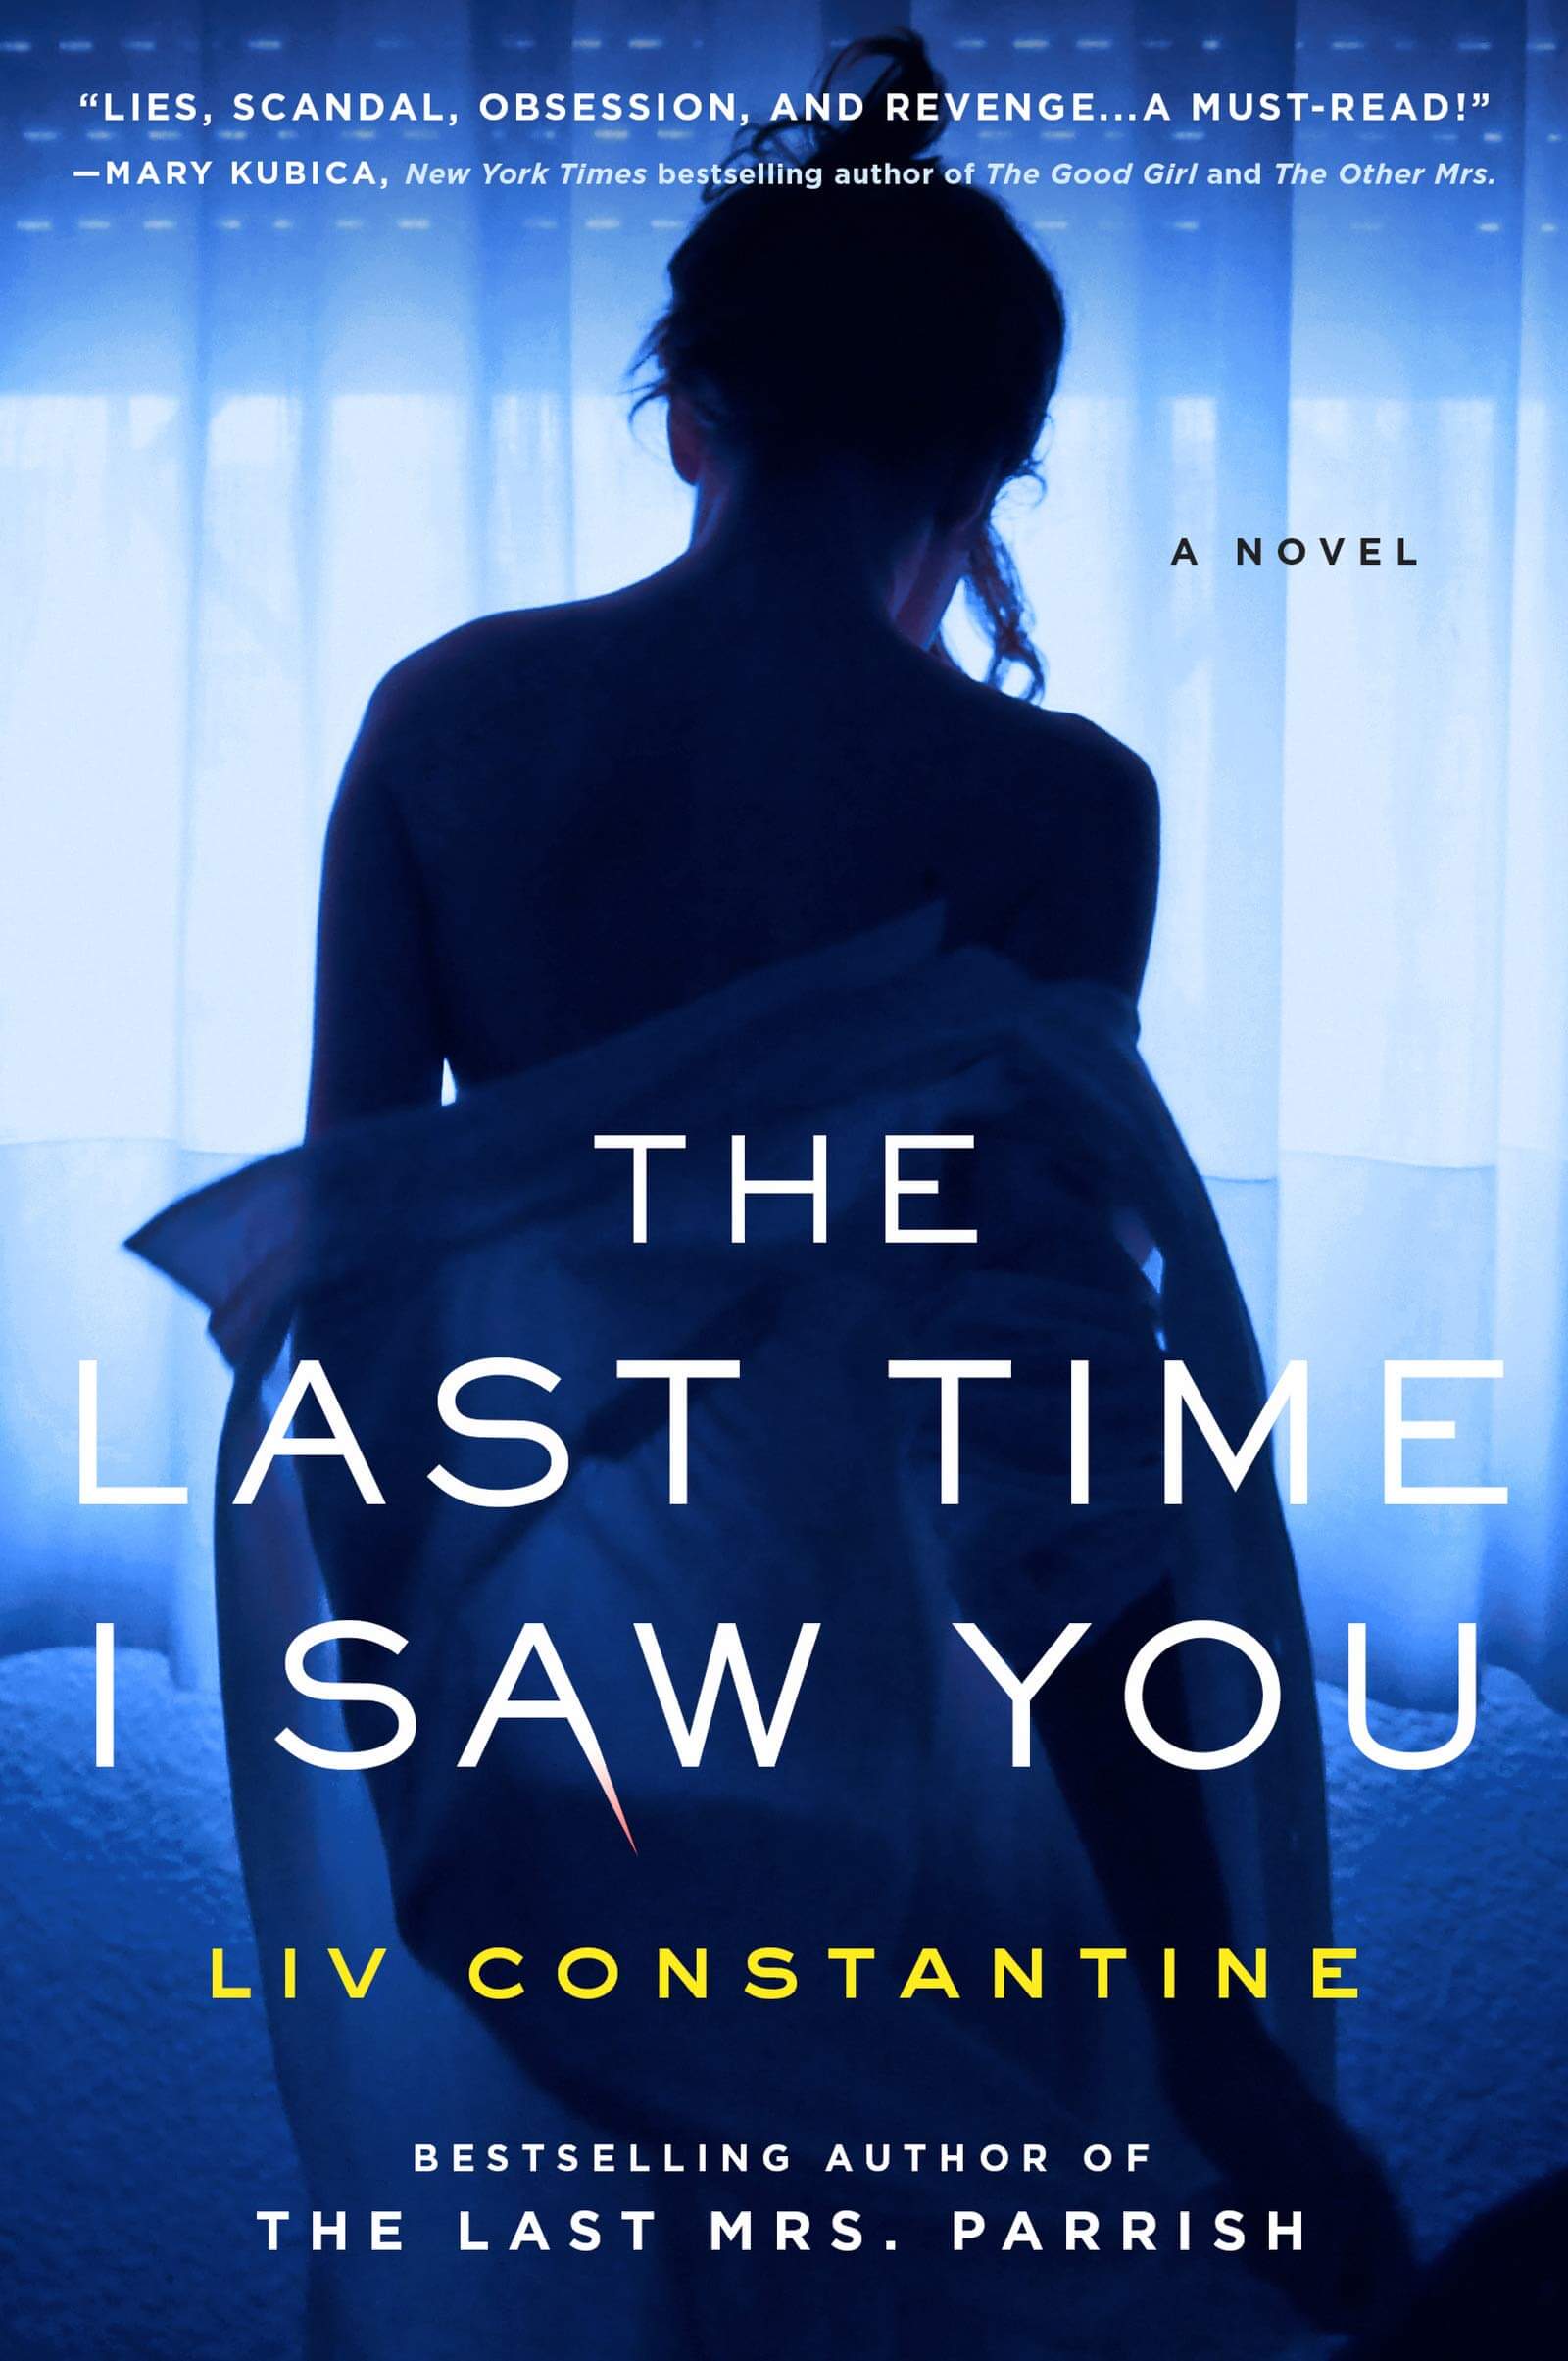 Cover of The Last Time I Saw You by Liv Constantine